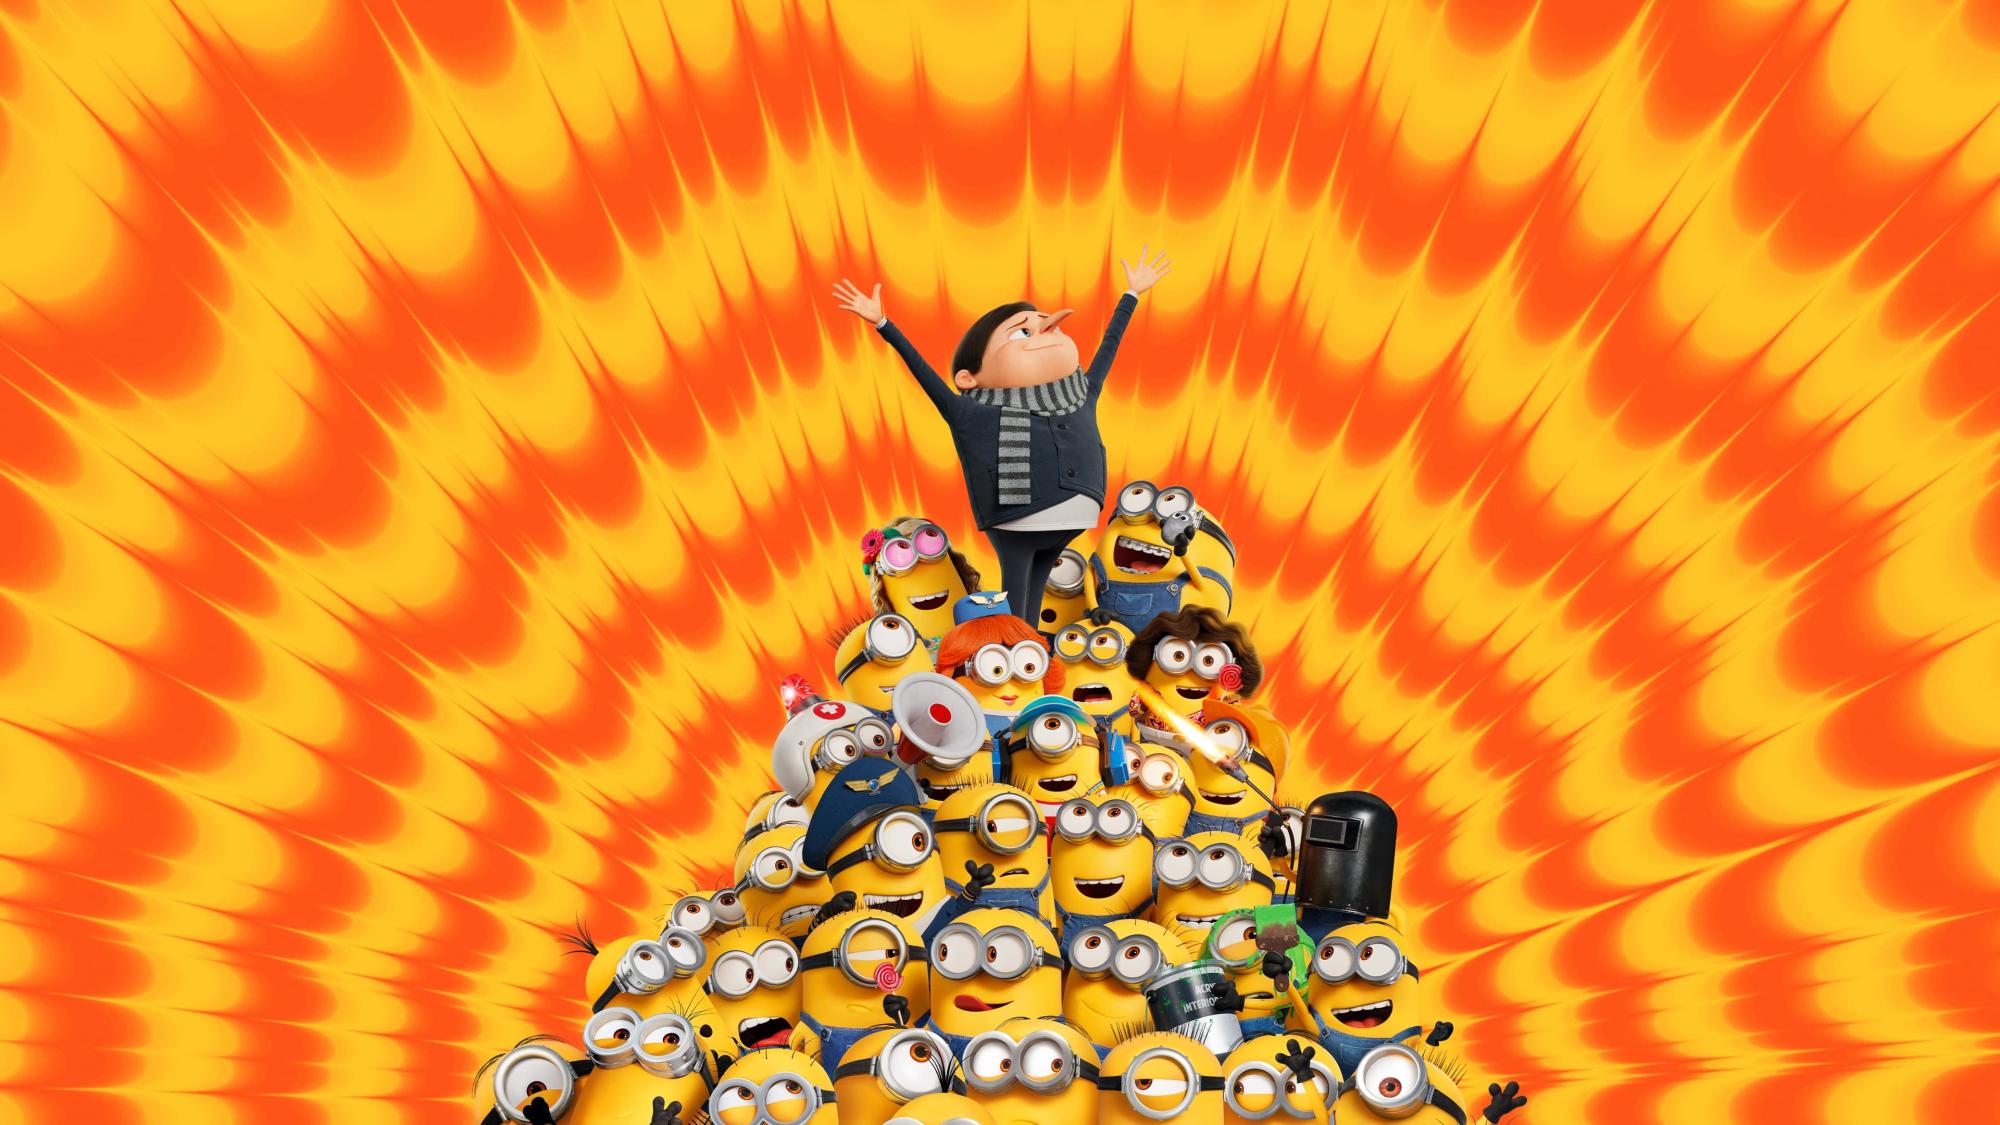 Backdrop Image for Minions: The Rise of Gru